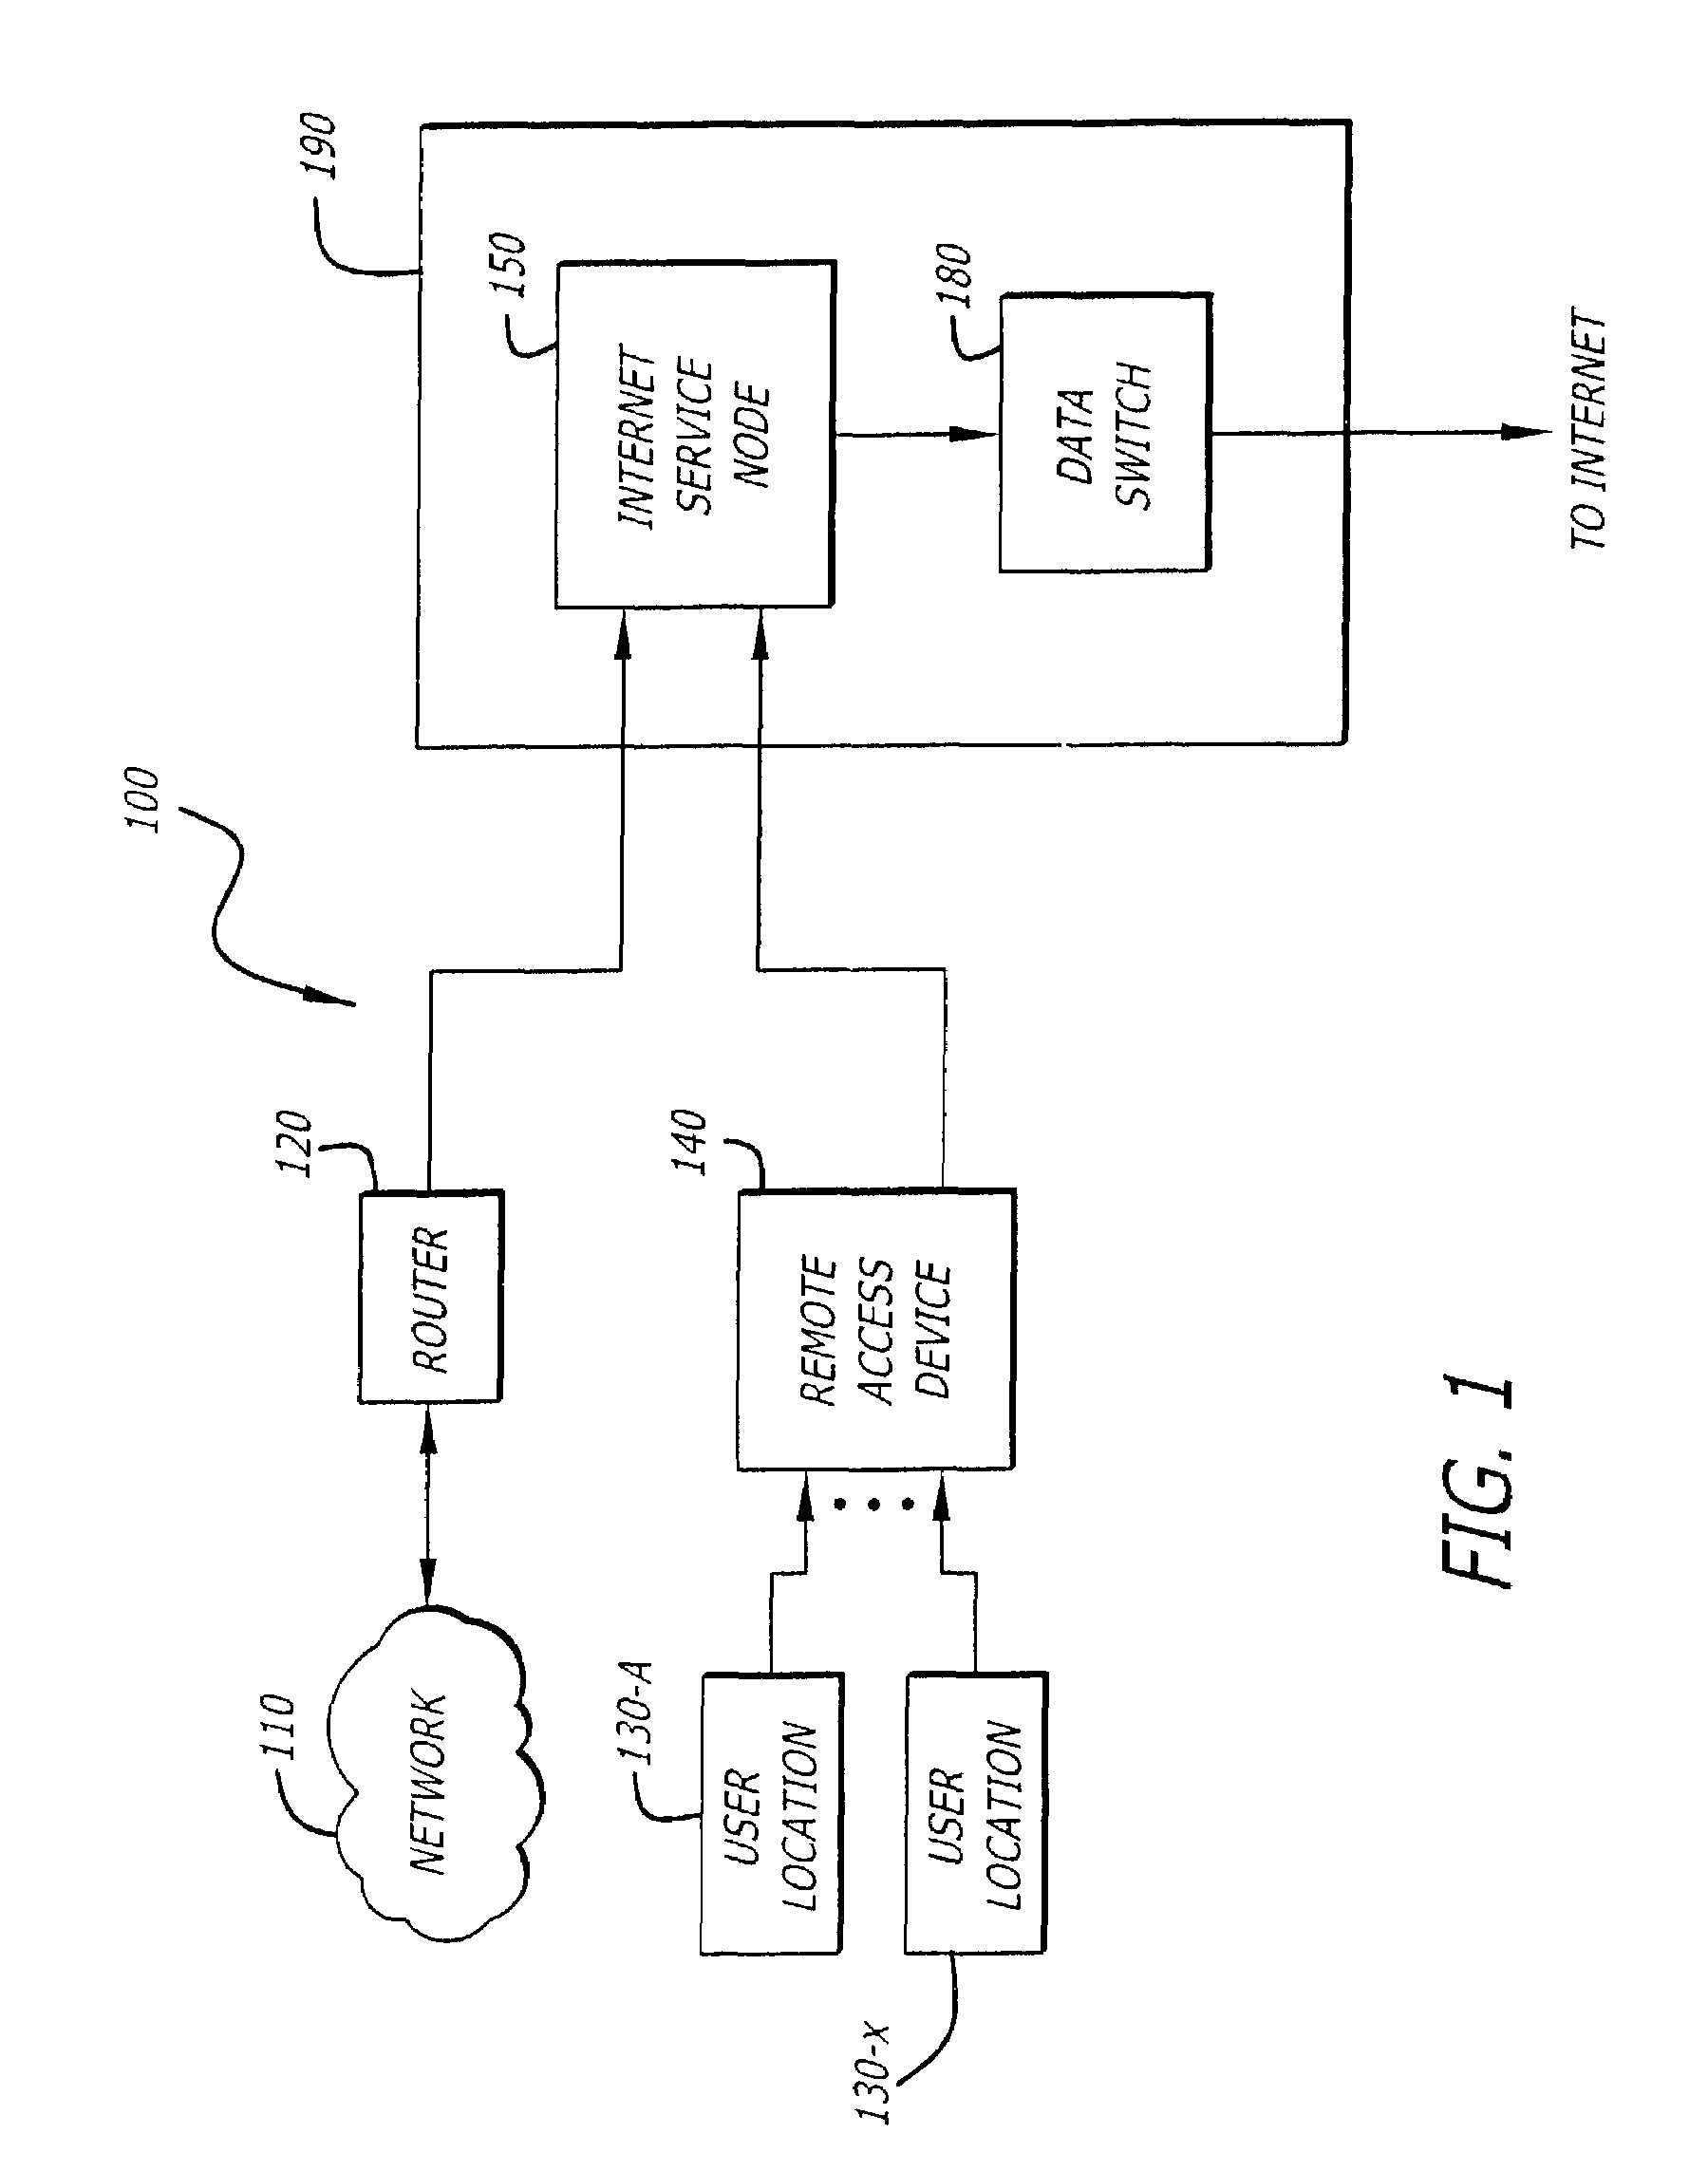 System and method for providing desired service policies to subscribers accessing the internet